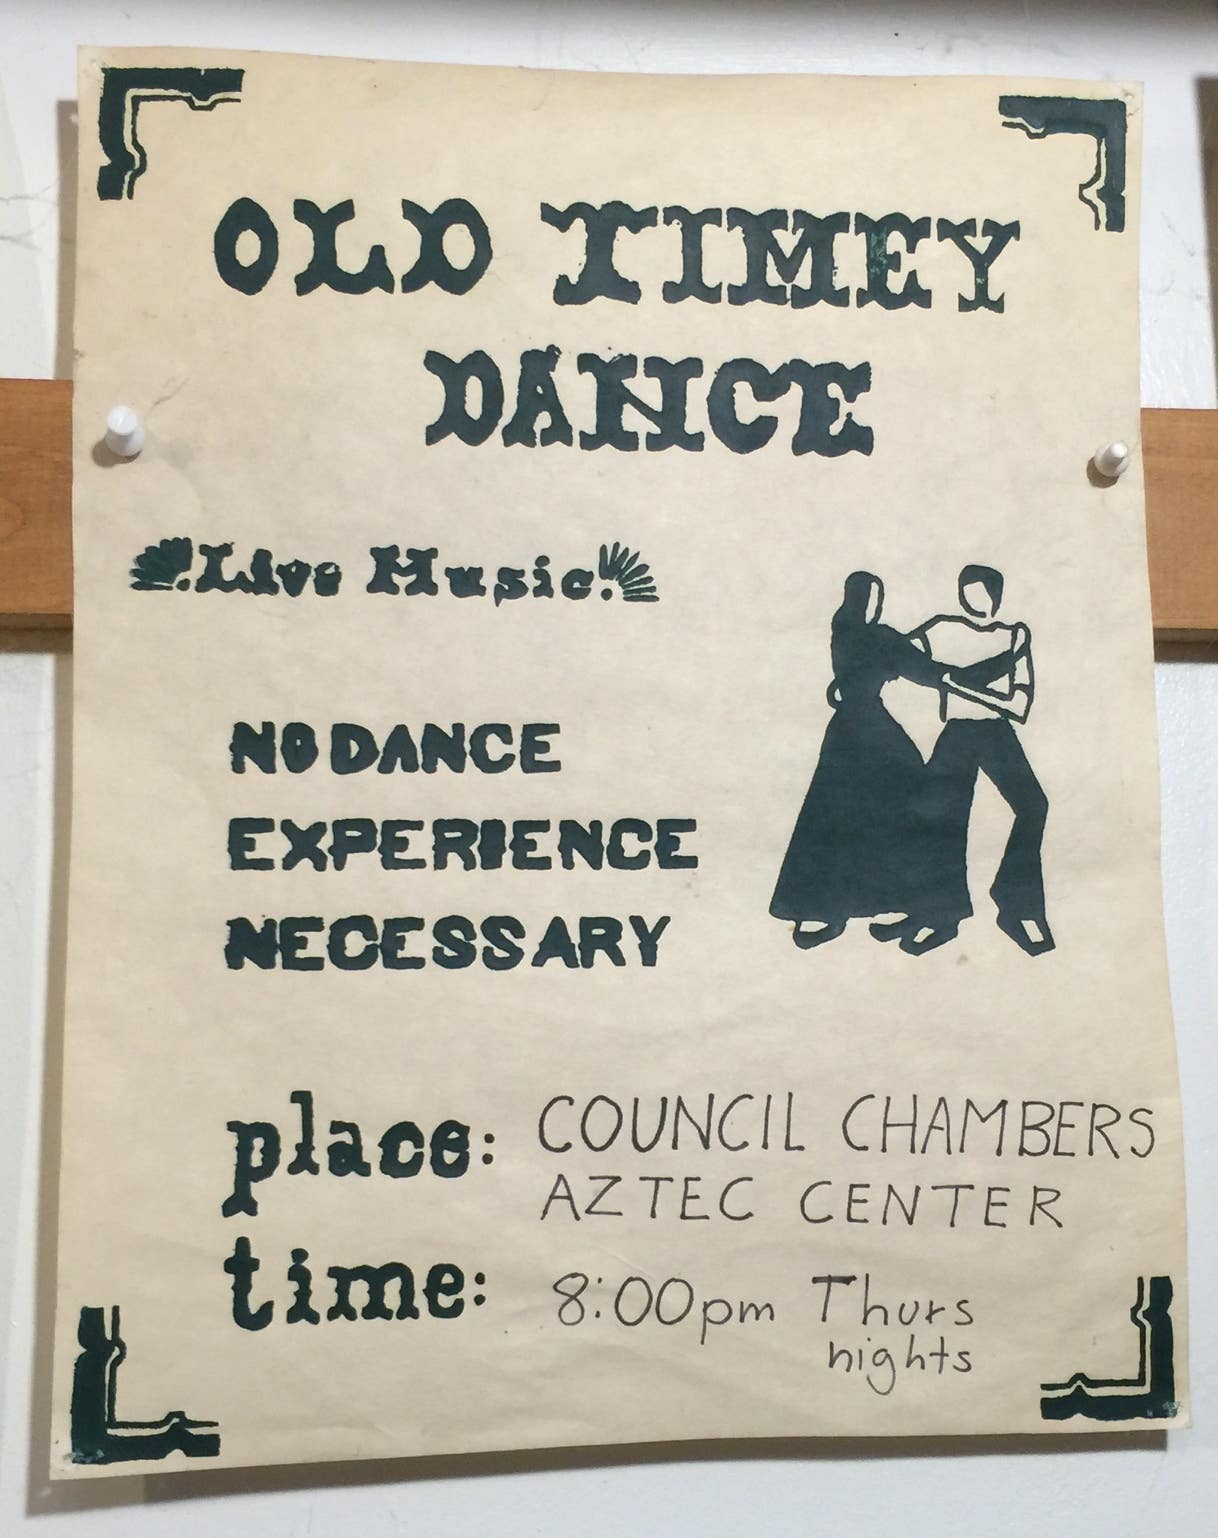 A poster for the Old Time dances organized by Ryan Thomson and held at San Diego State University in 1975